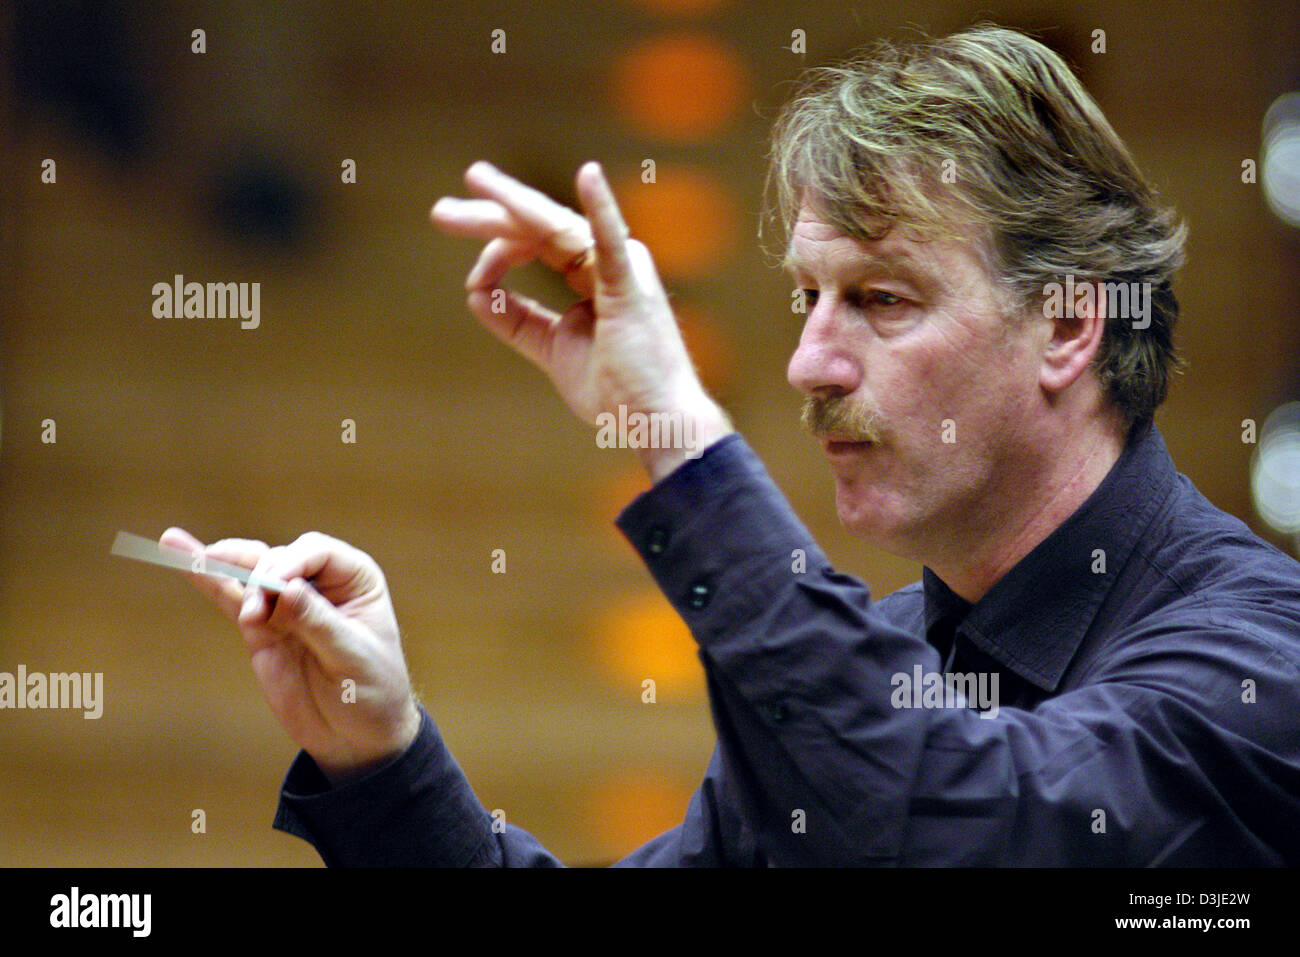 dpa) - Dutch conductor Jac van Steen rehearses as a guest of the  philharmonic orchestra Cologne in Cologne, Germany, 12 January 2005. Since  the season 2002/03 van Steen is the musical director